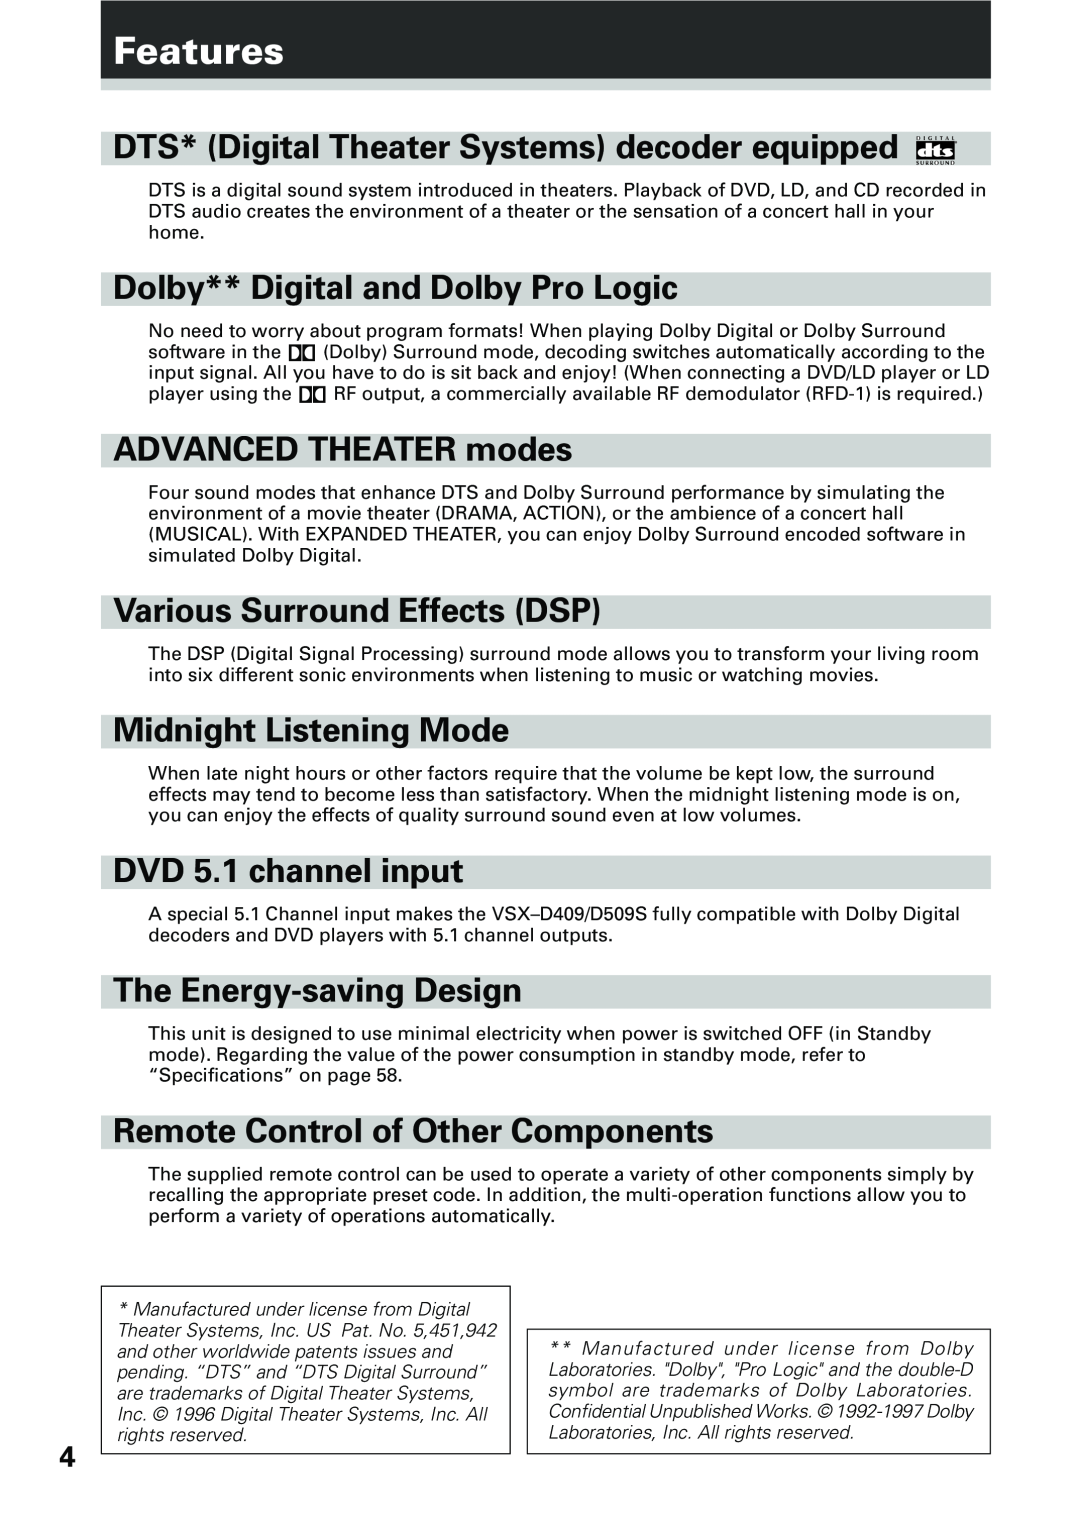 Pioneer VSX-D509S, VSX-D409 Features, DTS* Digital Theater Systems decoder equipped, Dolby** Digital and Dolby Pro Logic 